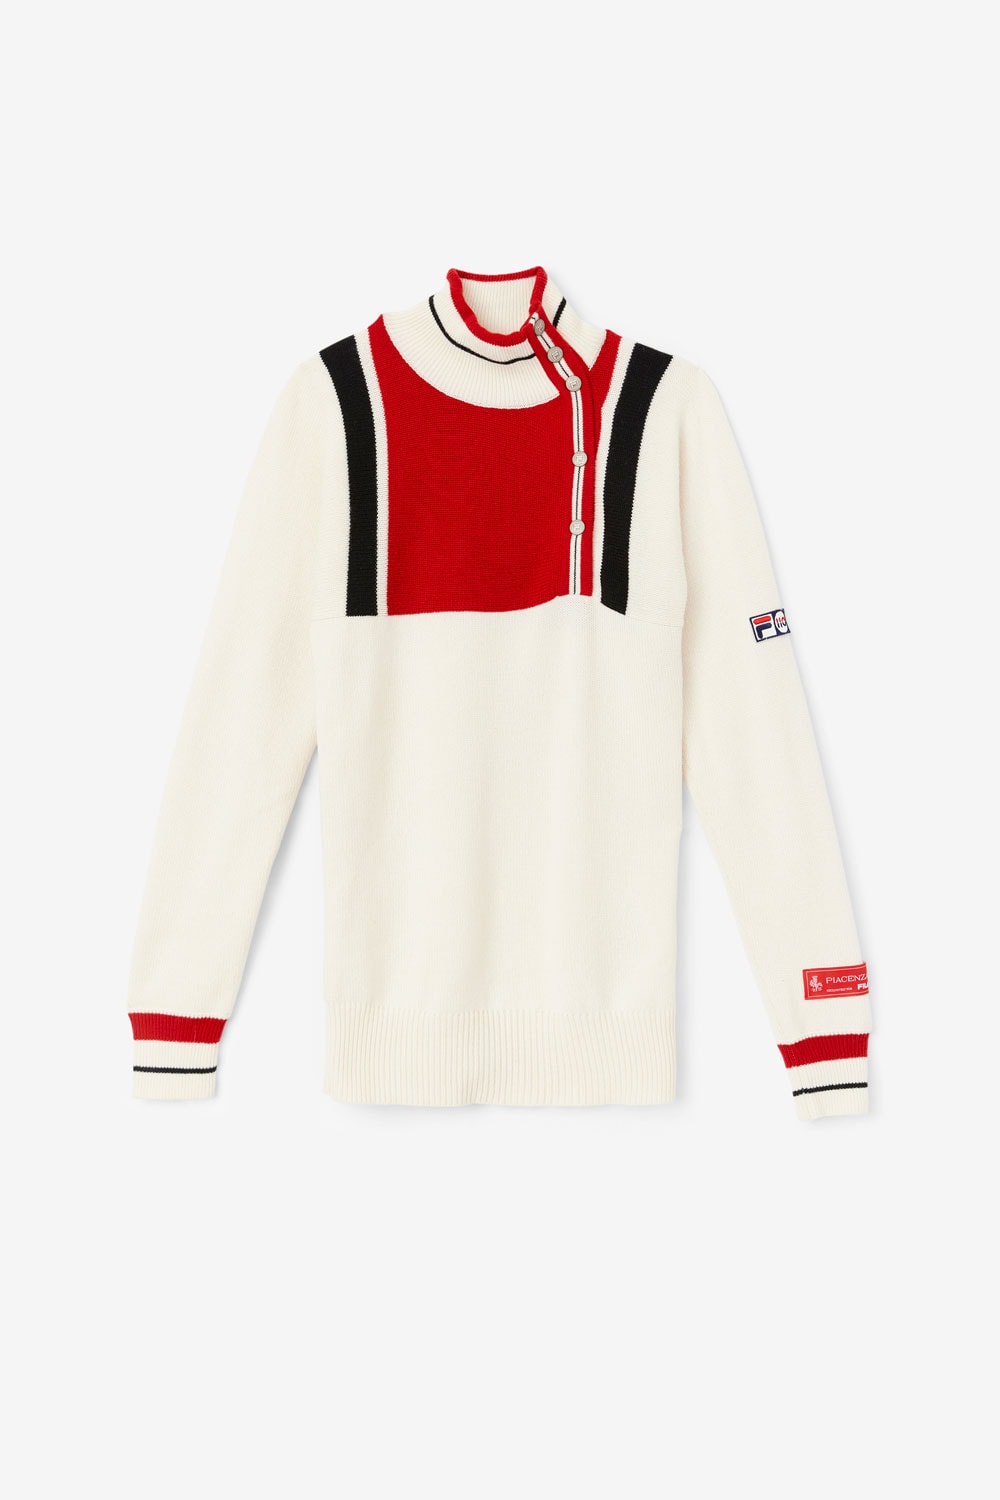 fila piacenza cashmere exclusive limited special edition anniversary collection knitwear wool unisex winter beanie women’s girdle skirt the argyle snow time white rock sweaters